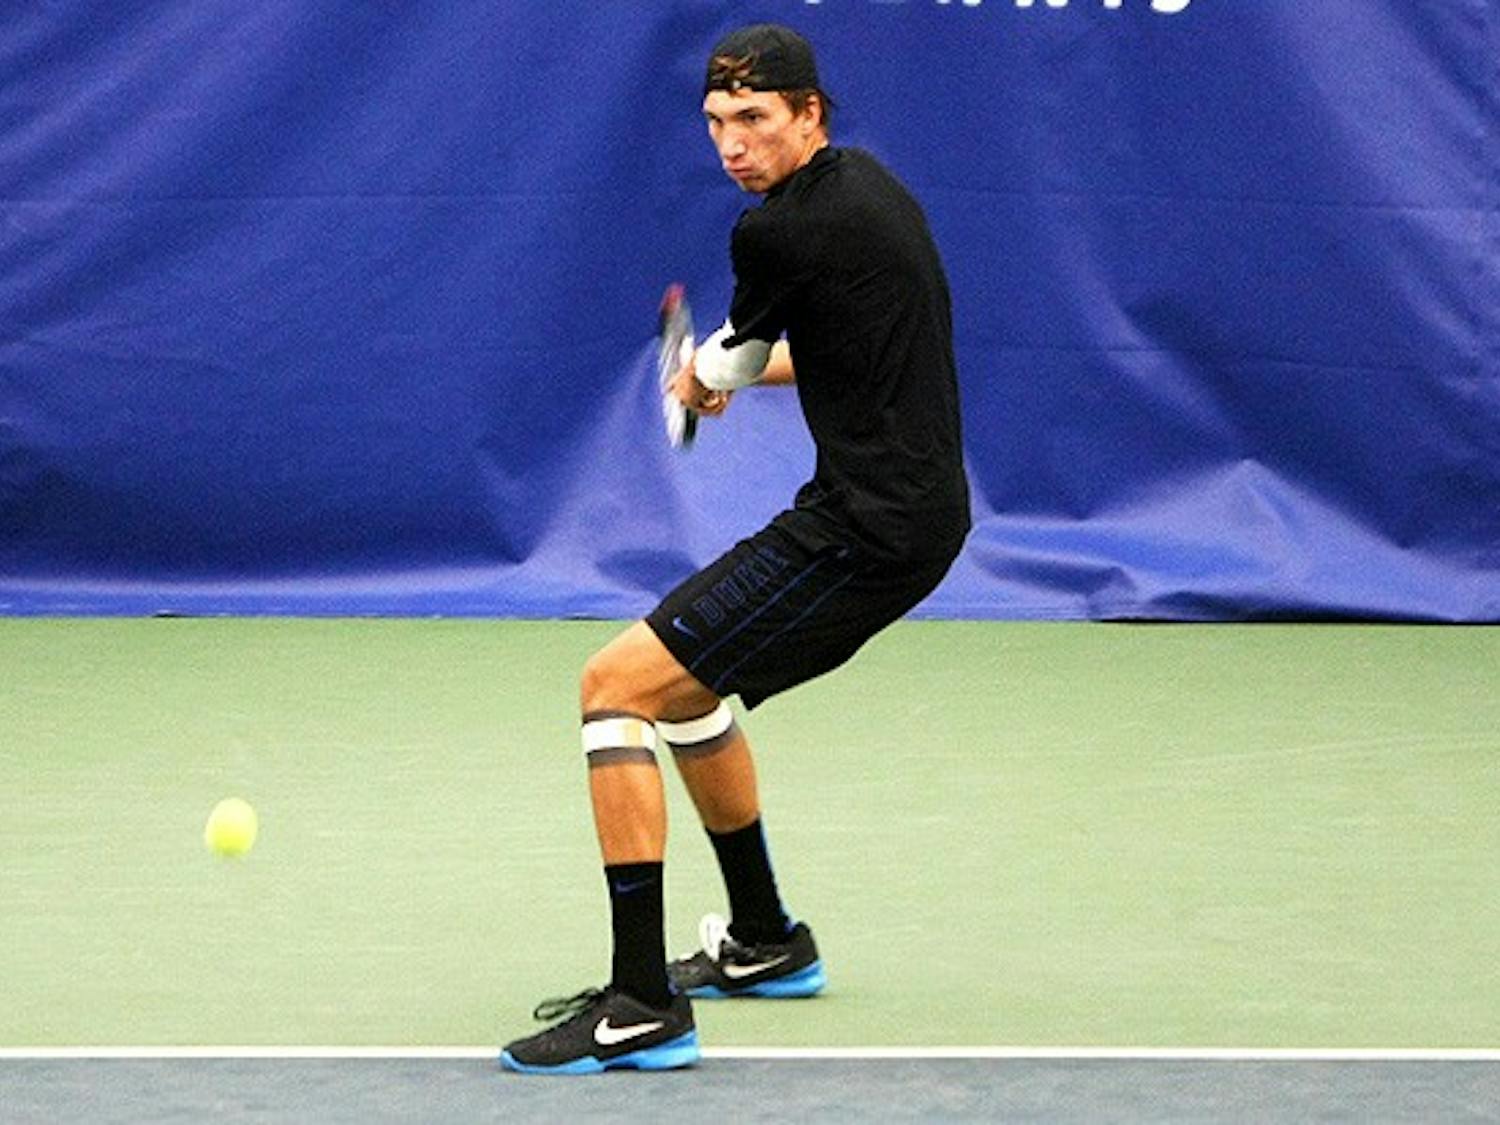 Michael Redlick, pictured, and partner Jason Tahir are ranked No. 9 in the nation.